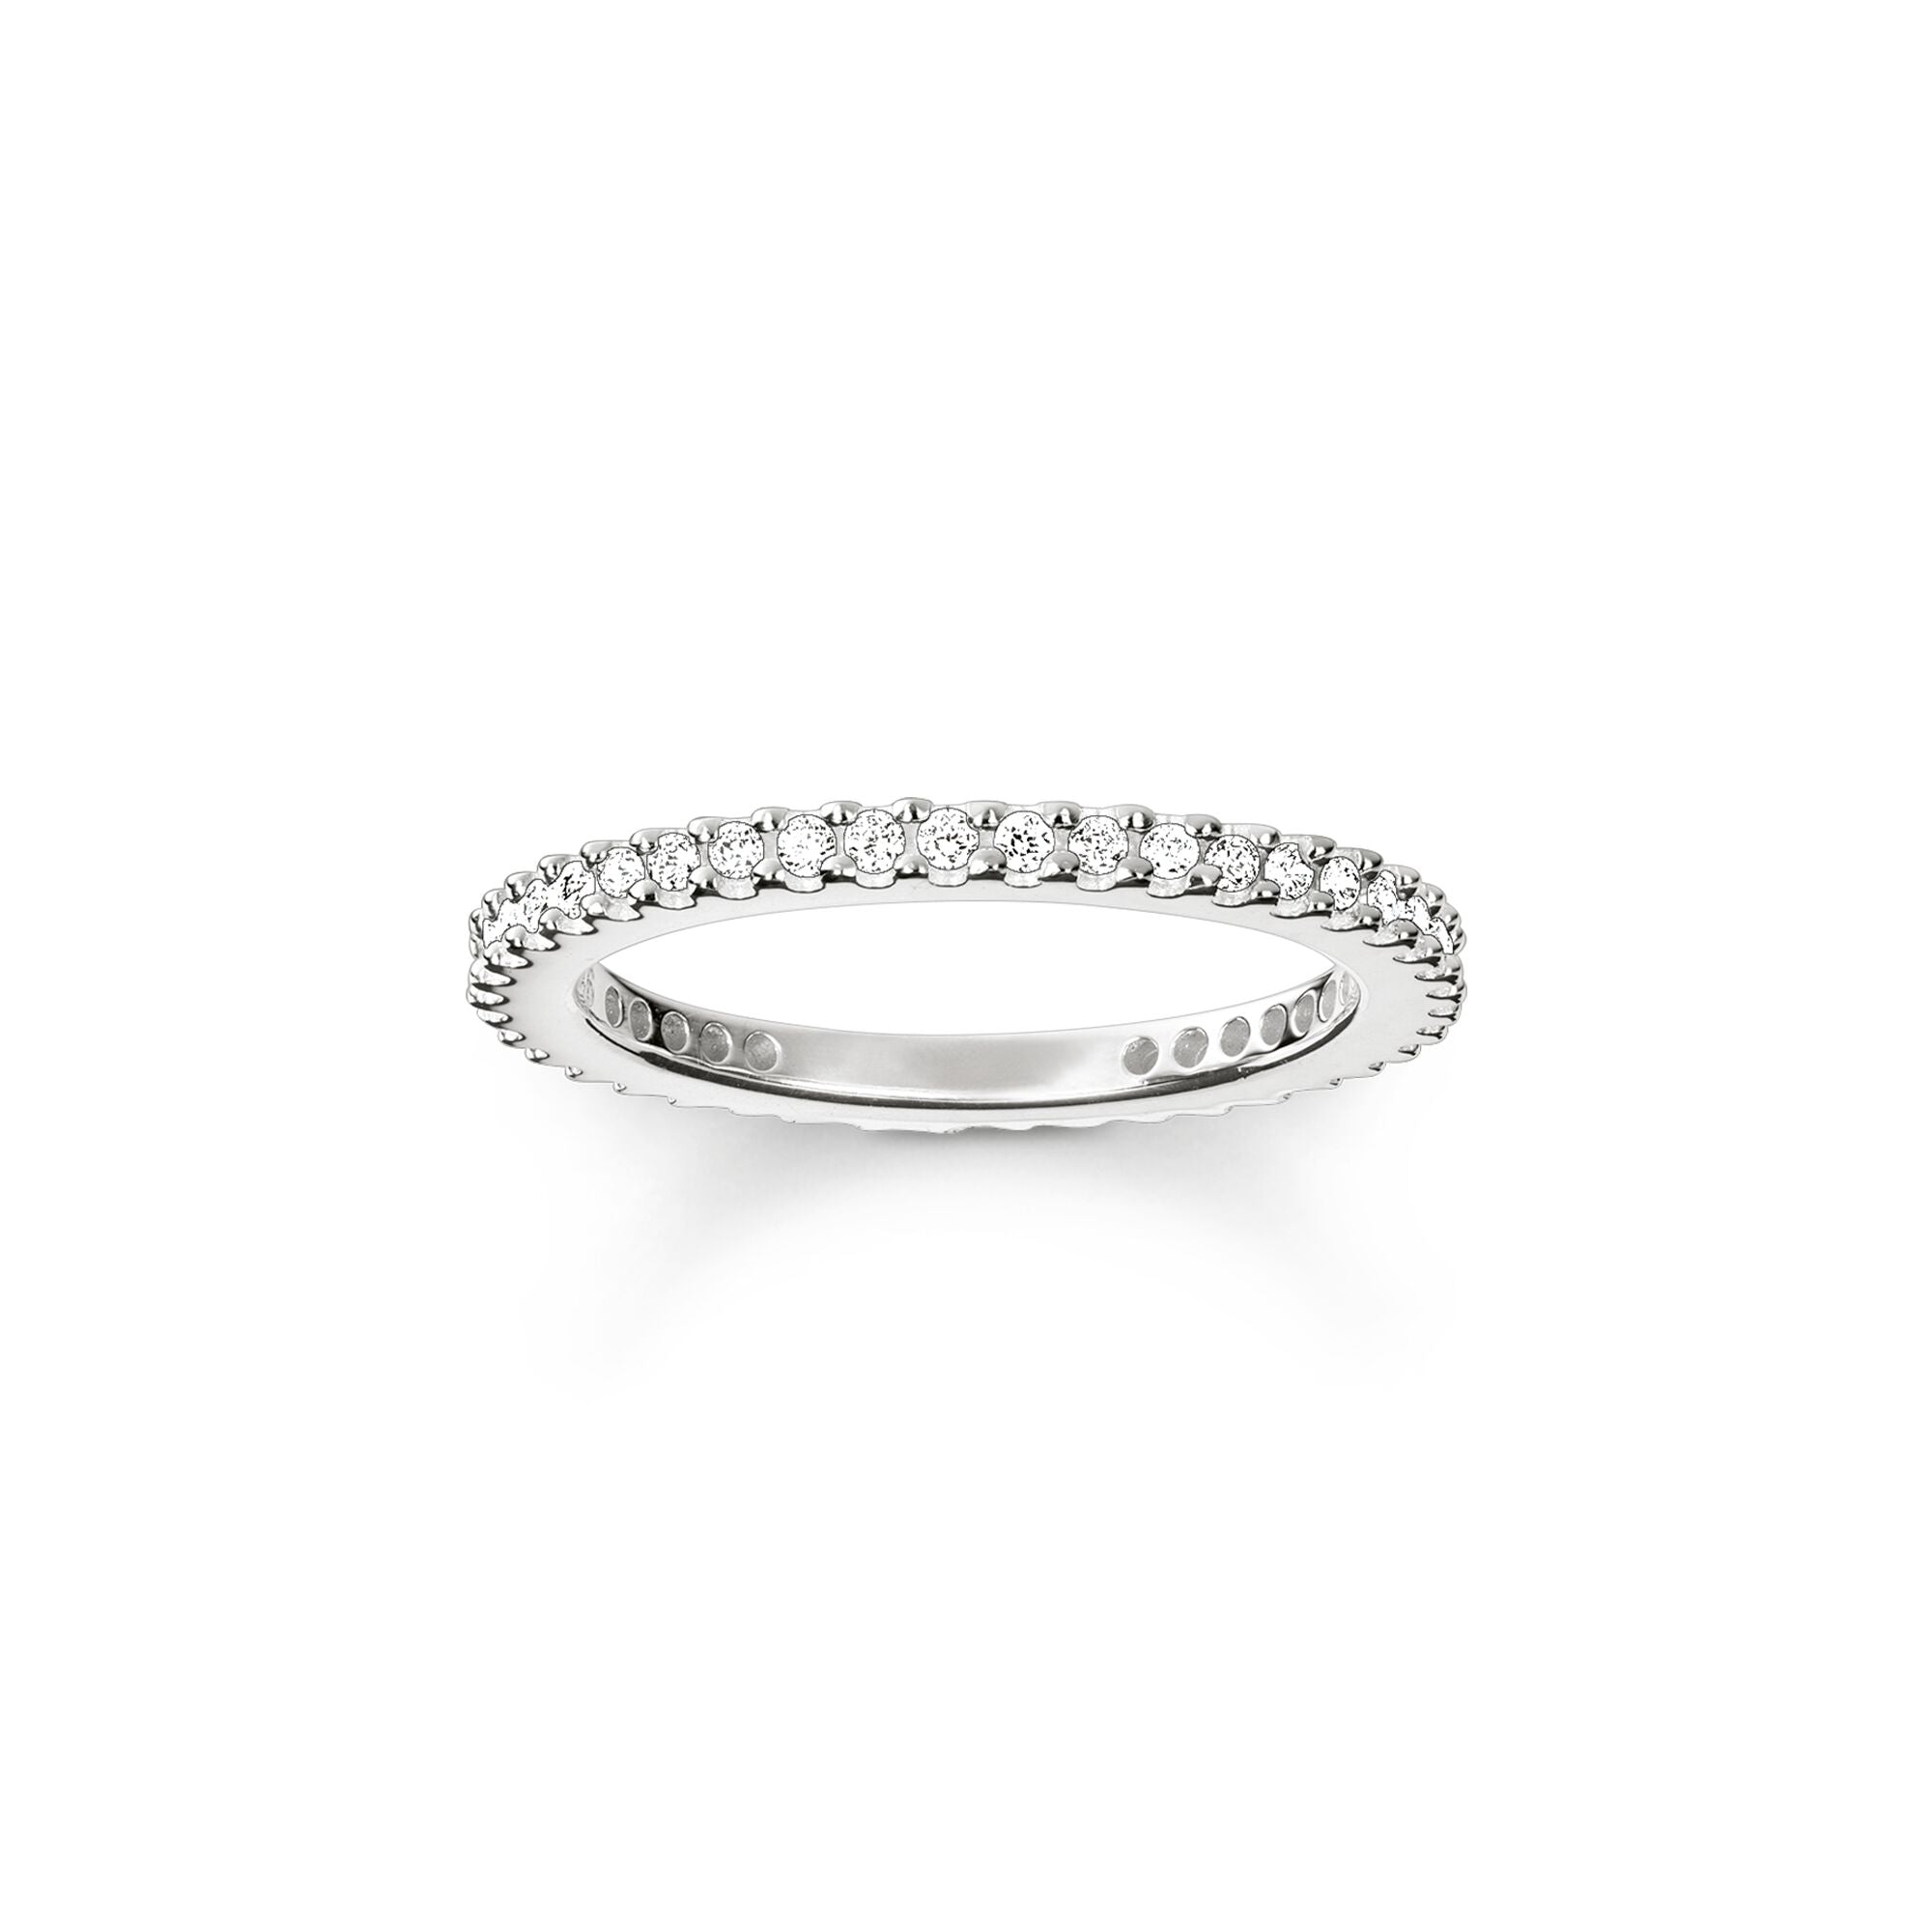 Thomas Sabo Sterling Silver White CZ Pave Eternity Ring